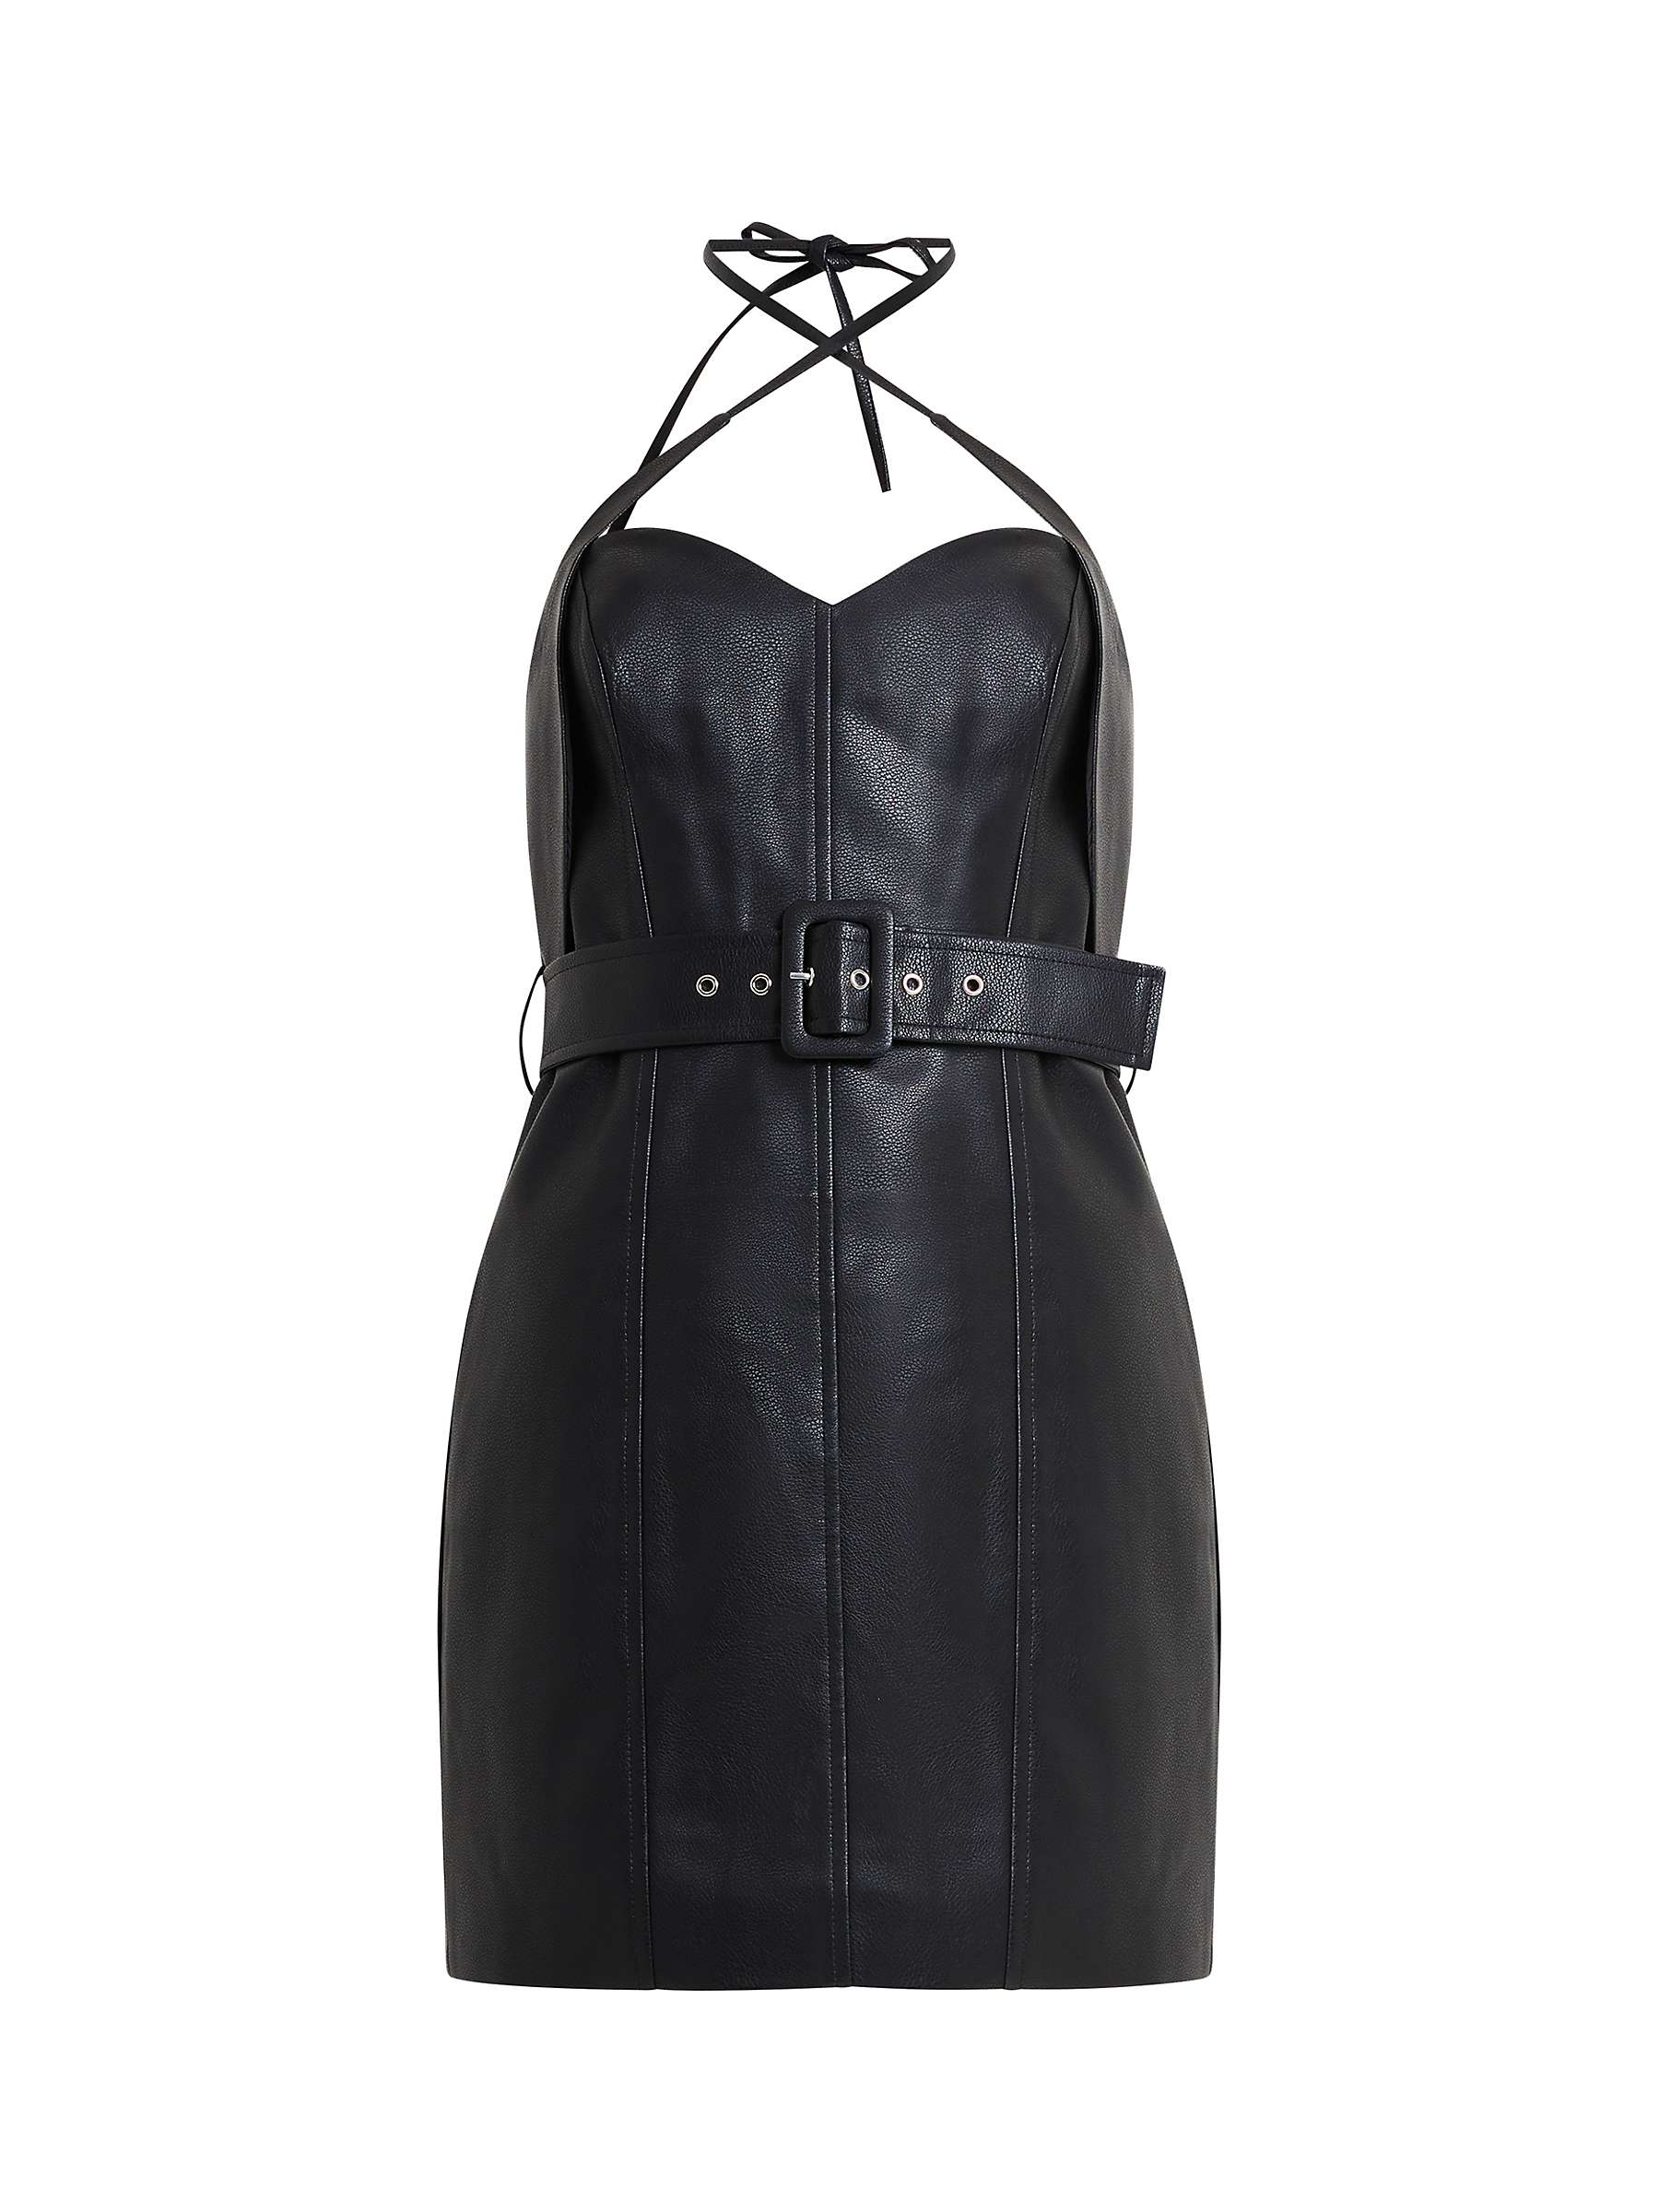 Buy French Connection Claudia Bodycon Dress, Blackout Online at johnlewis.com